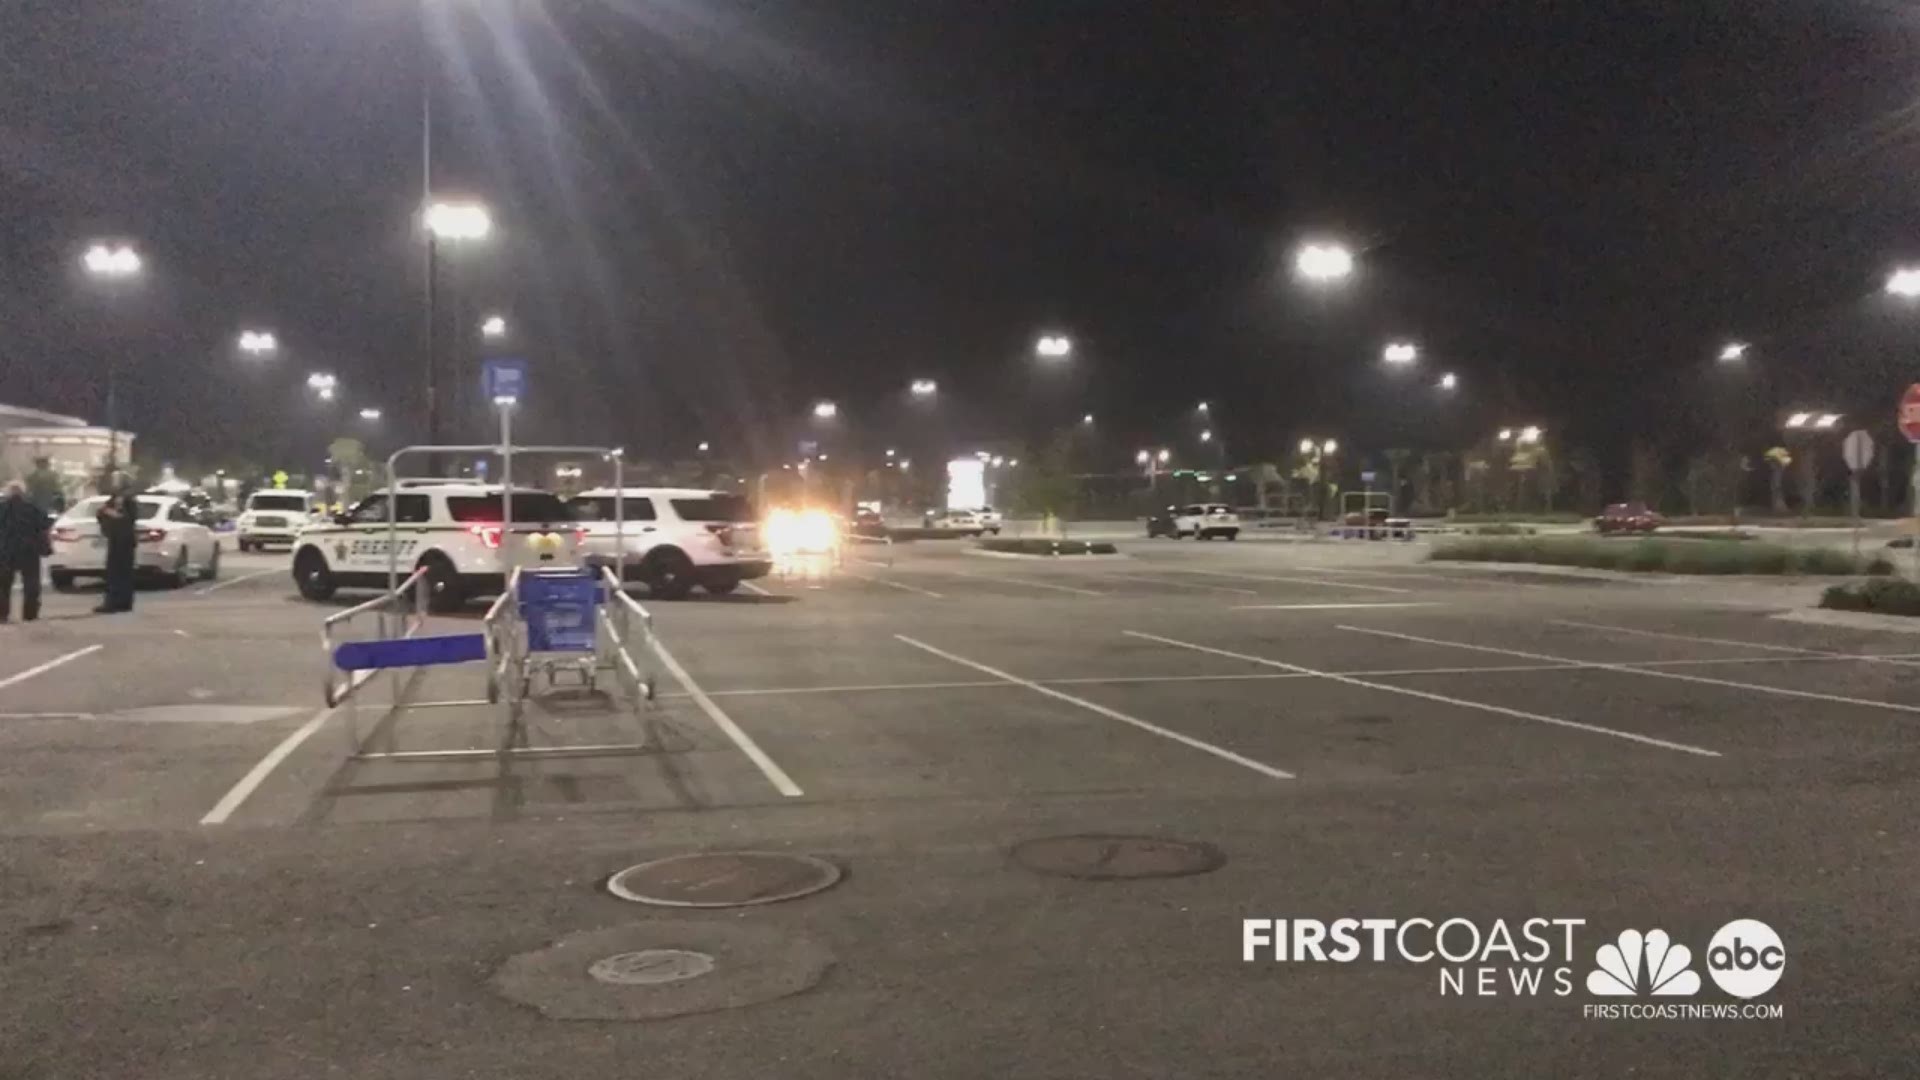 A viewer reported seeing "massive" police activity at the Walmart, located at 845 Durbin Pavilion Dr., around 11 p.m.